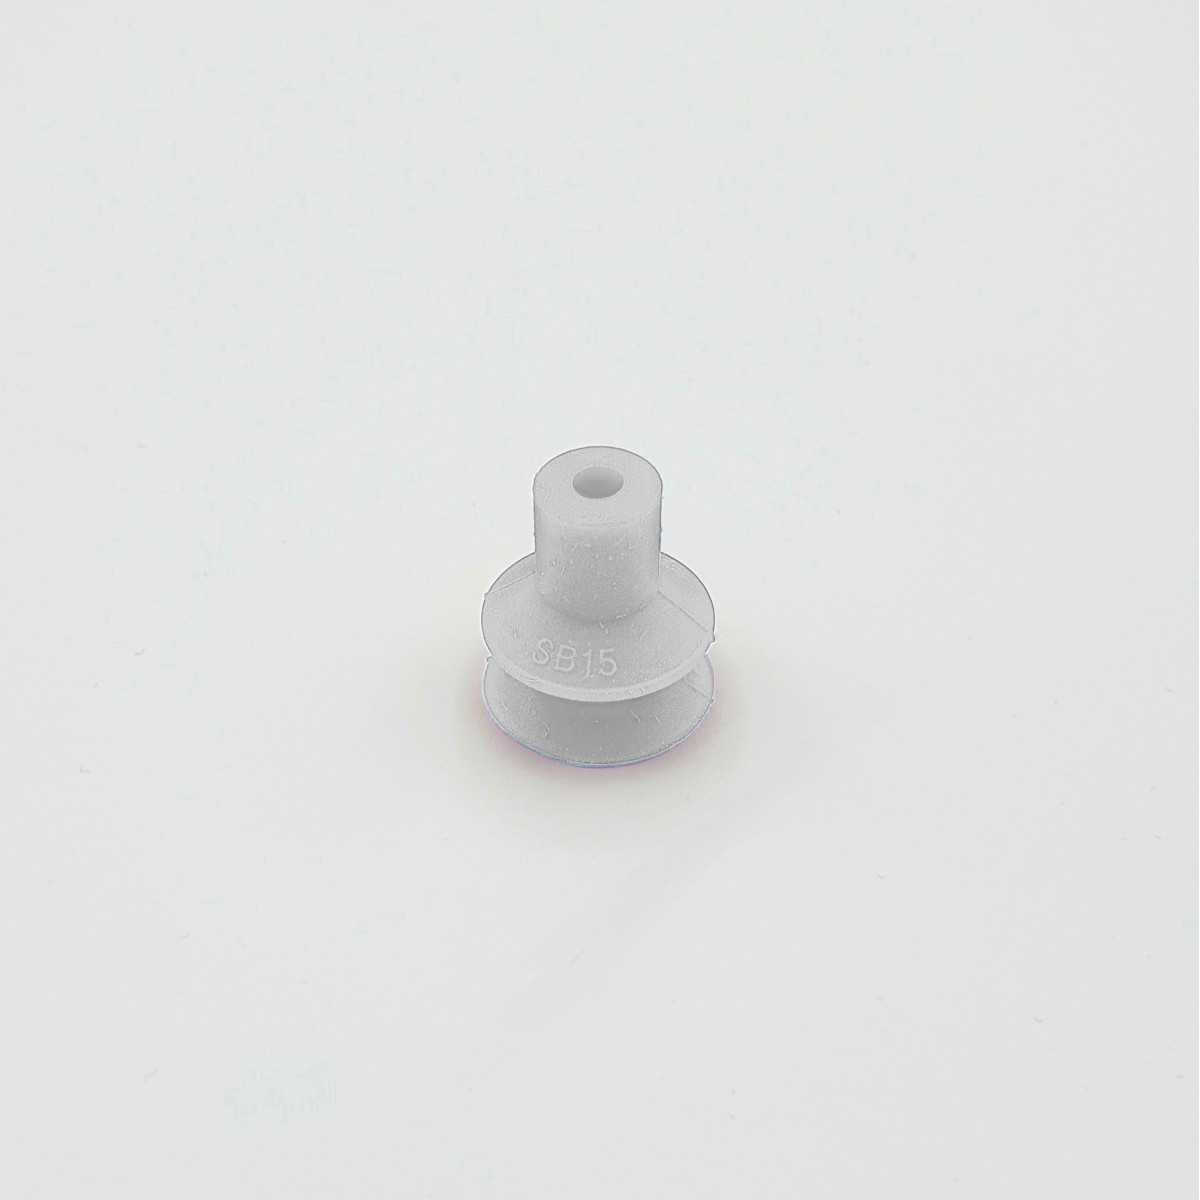 Bellows suction cup D5 / 1,5 / SI white / o.S. | Beta Online Shop